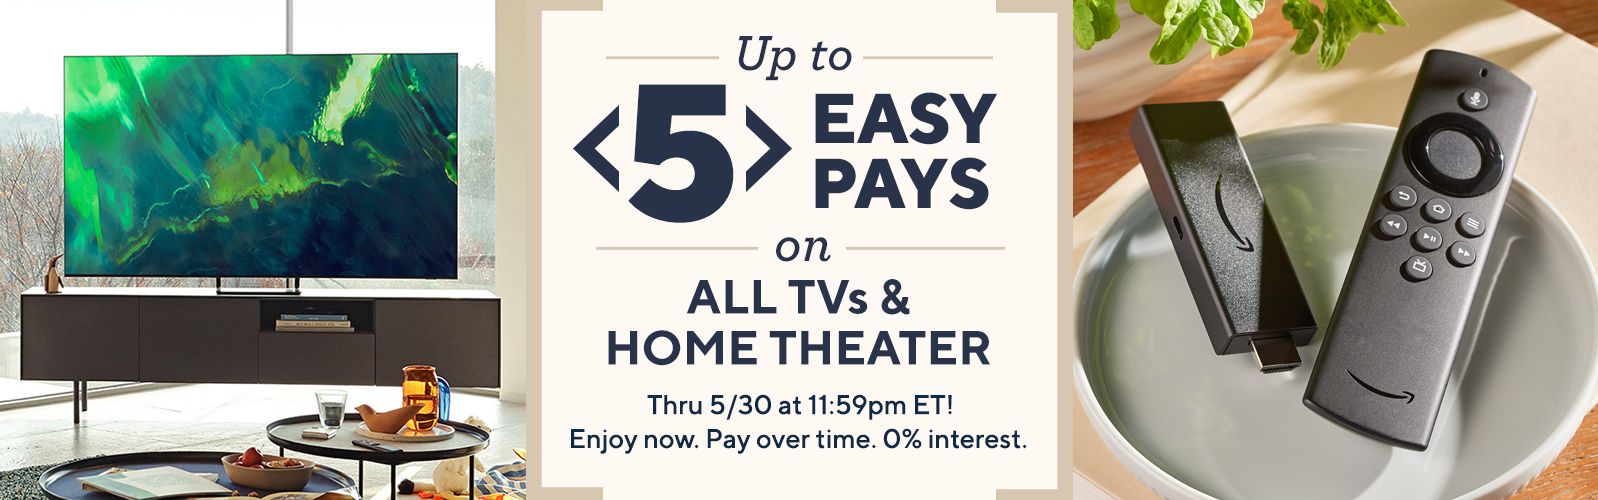 Up to 5 Easy Pays on All TVs & Home Theater. Thru 5/30 at 11:59pm ET! Enjoy now. Pay over time. 0% interest.